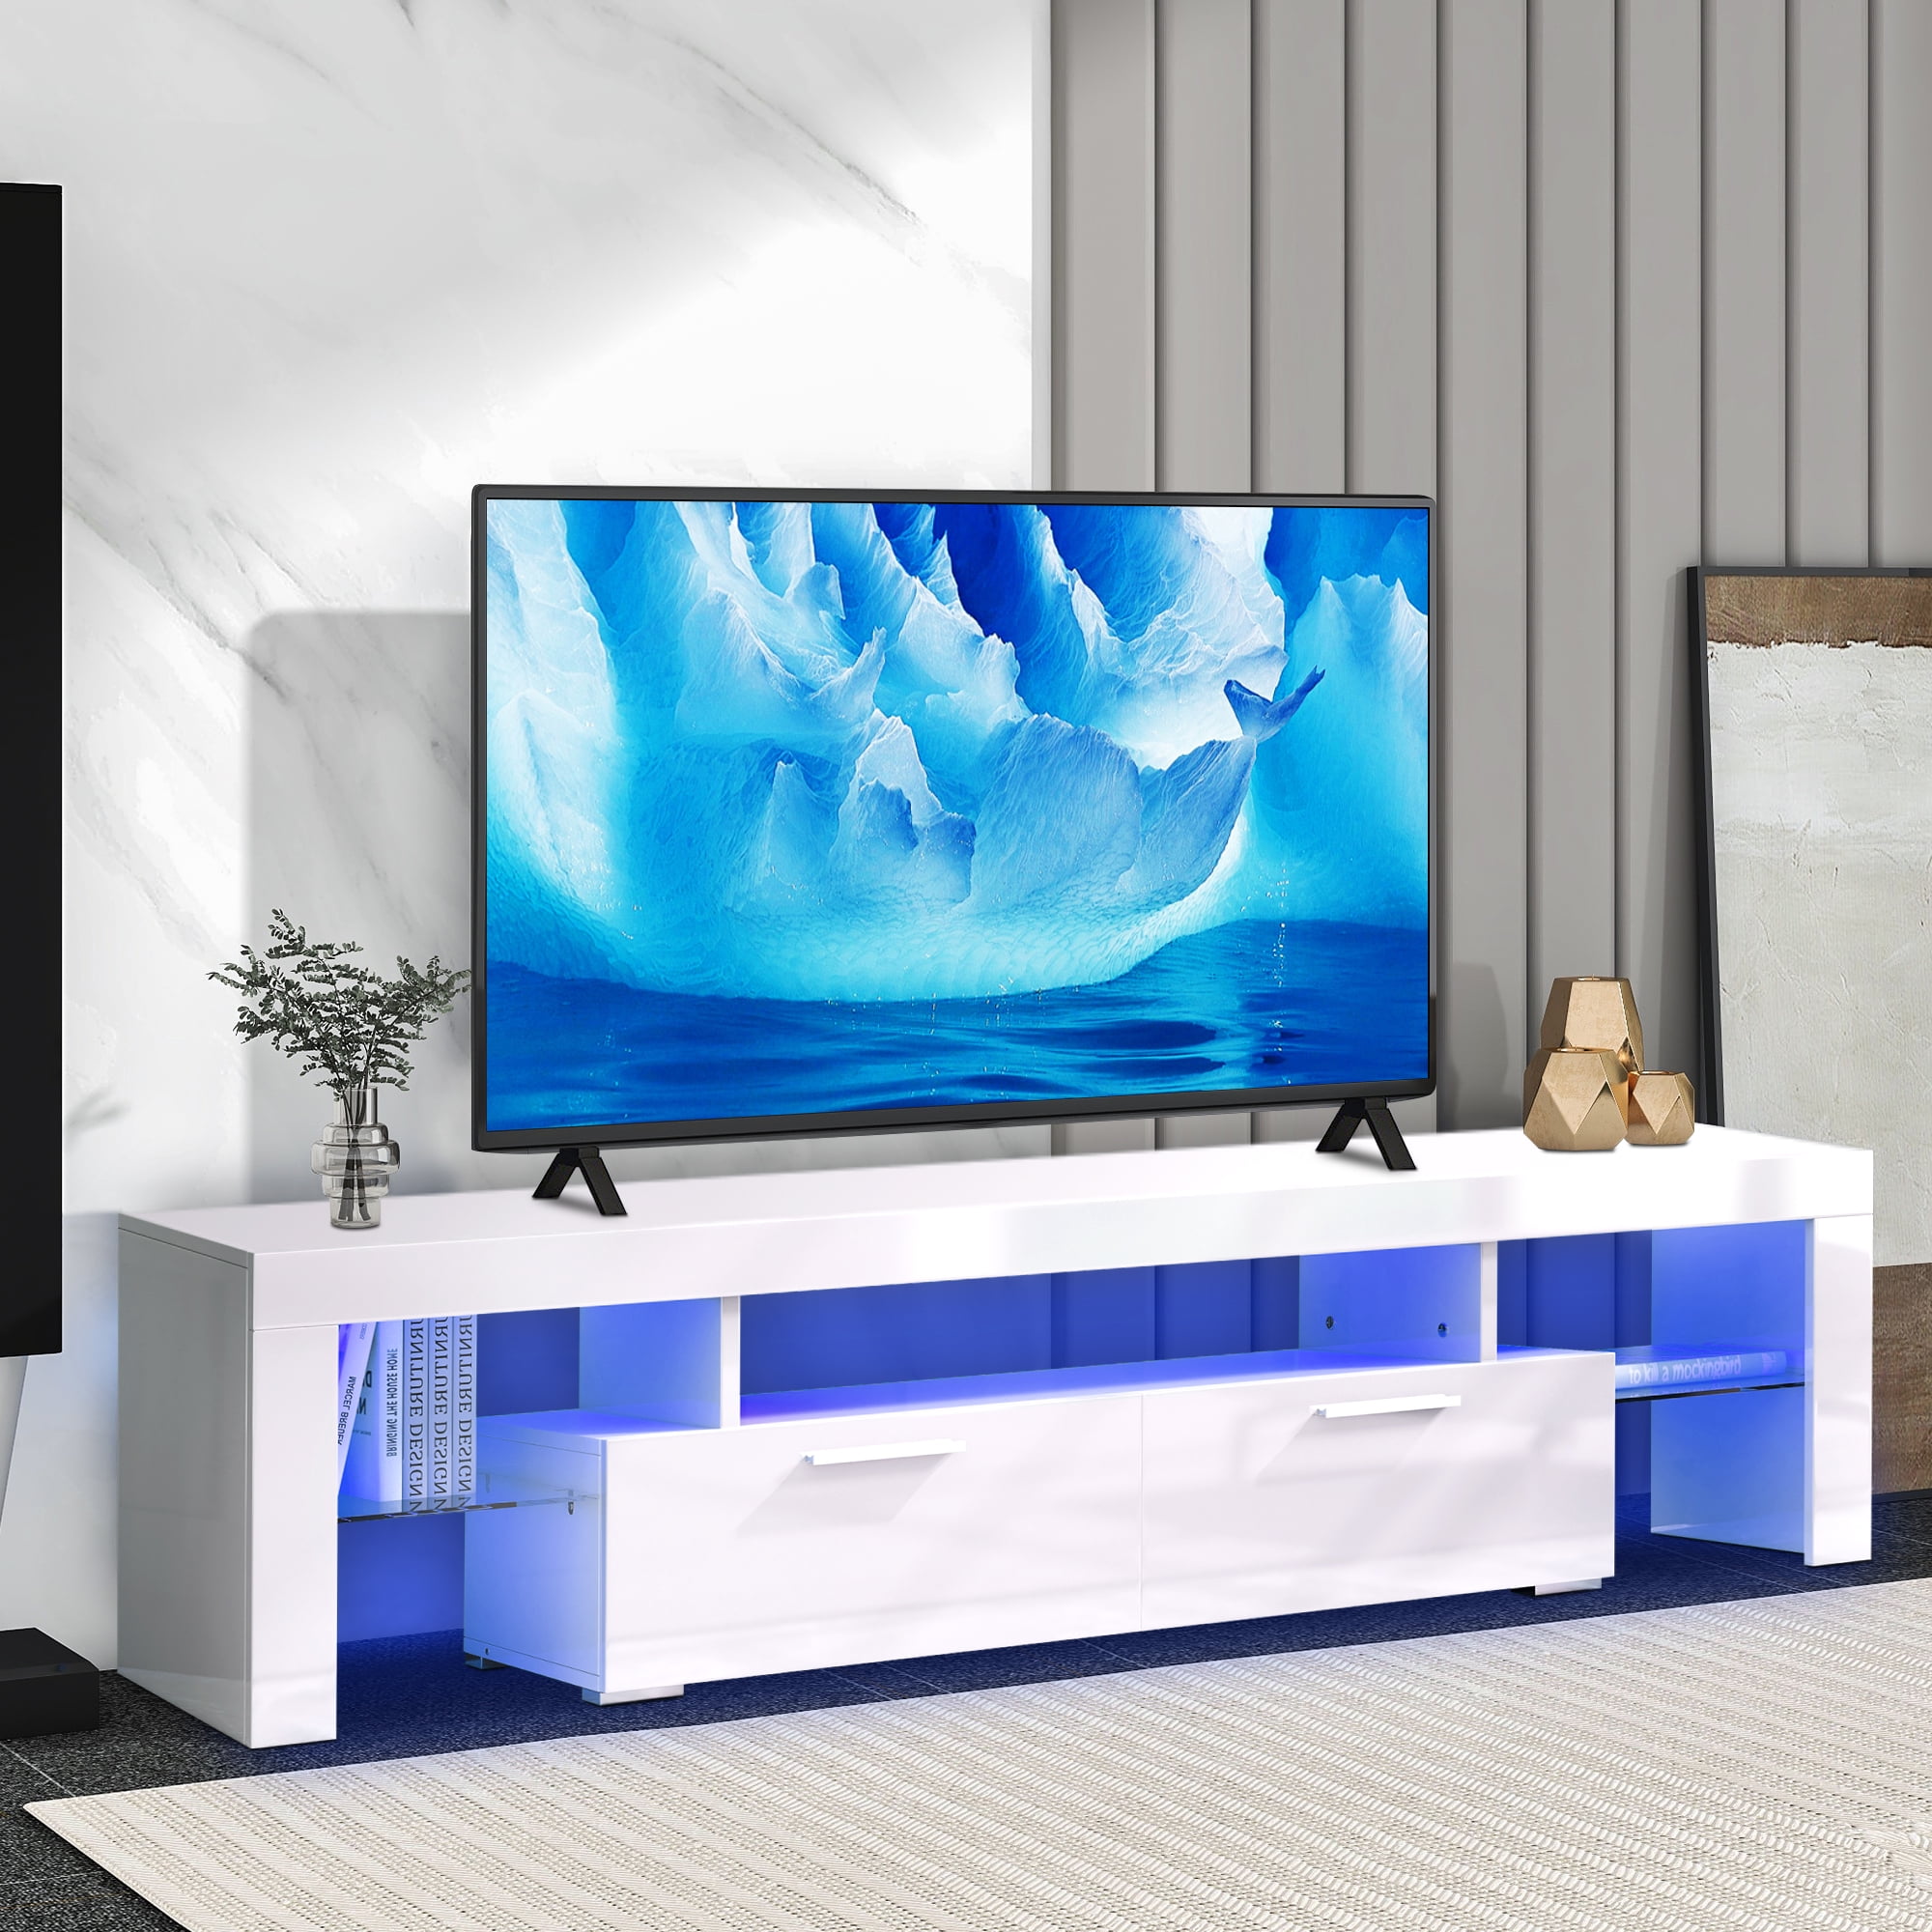 Watt Janice F.Kr. uhomepro TV Stand for TVs up to 80", Living Room Entertainment Center with  RGB LED Lights, APP and Remote Control, Black High Gloss TV Cabinet Console  Table - Walmart.com